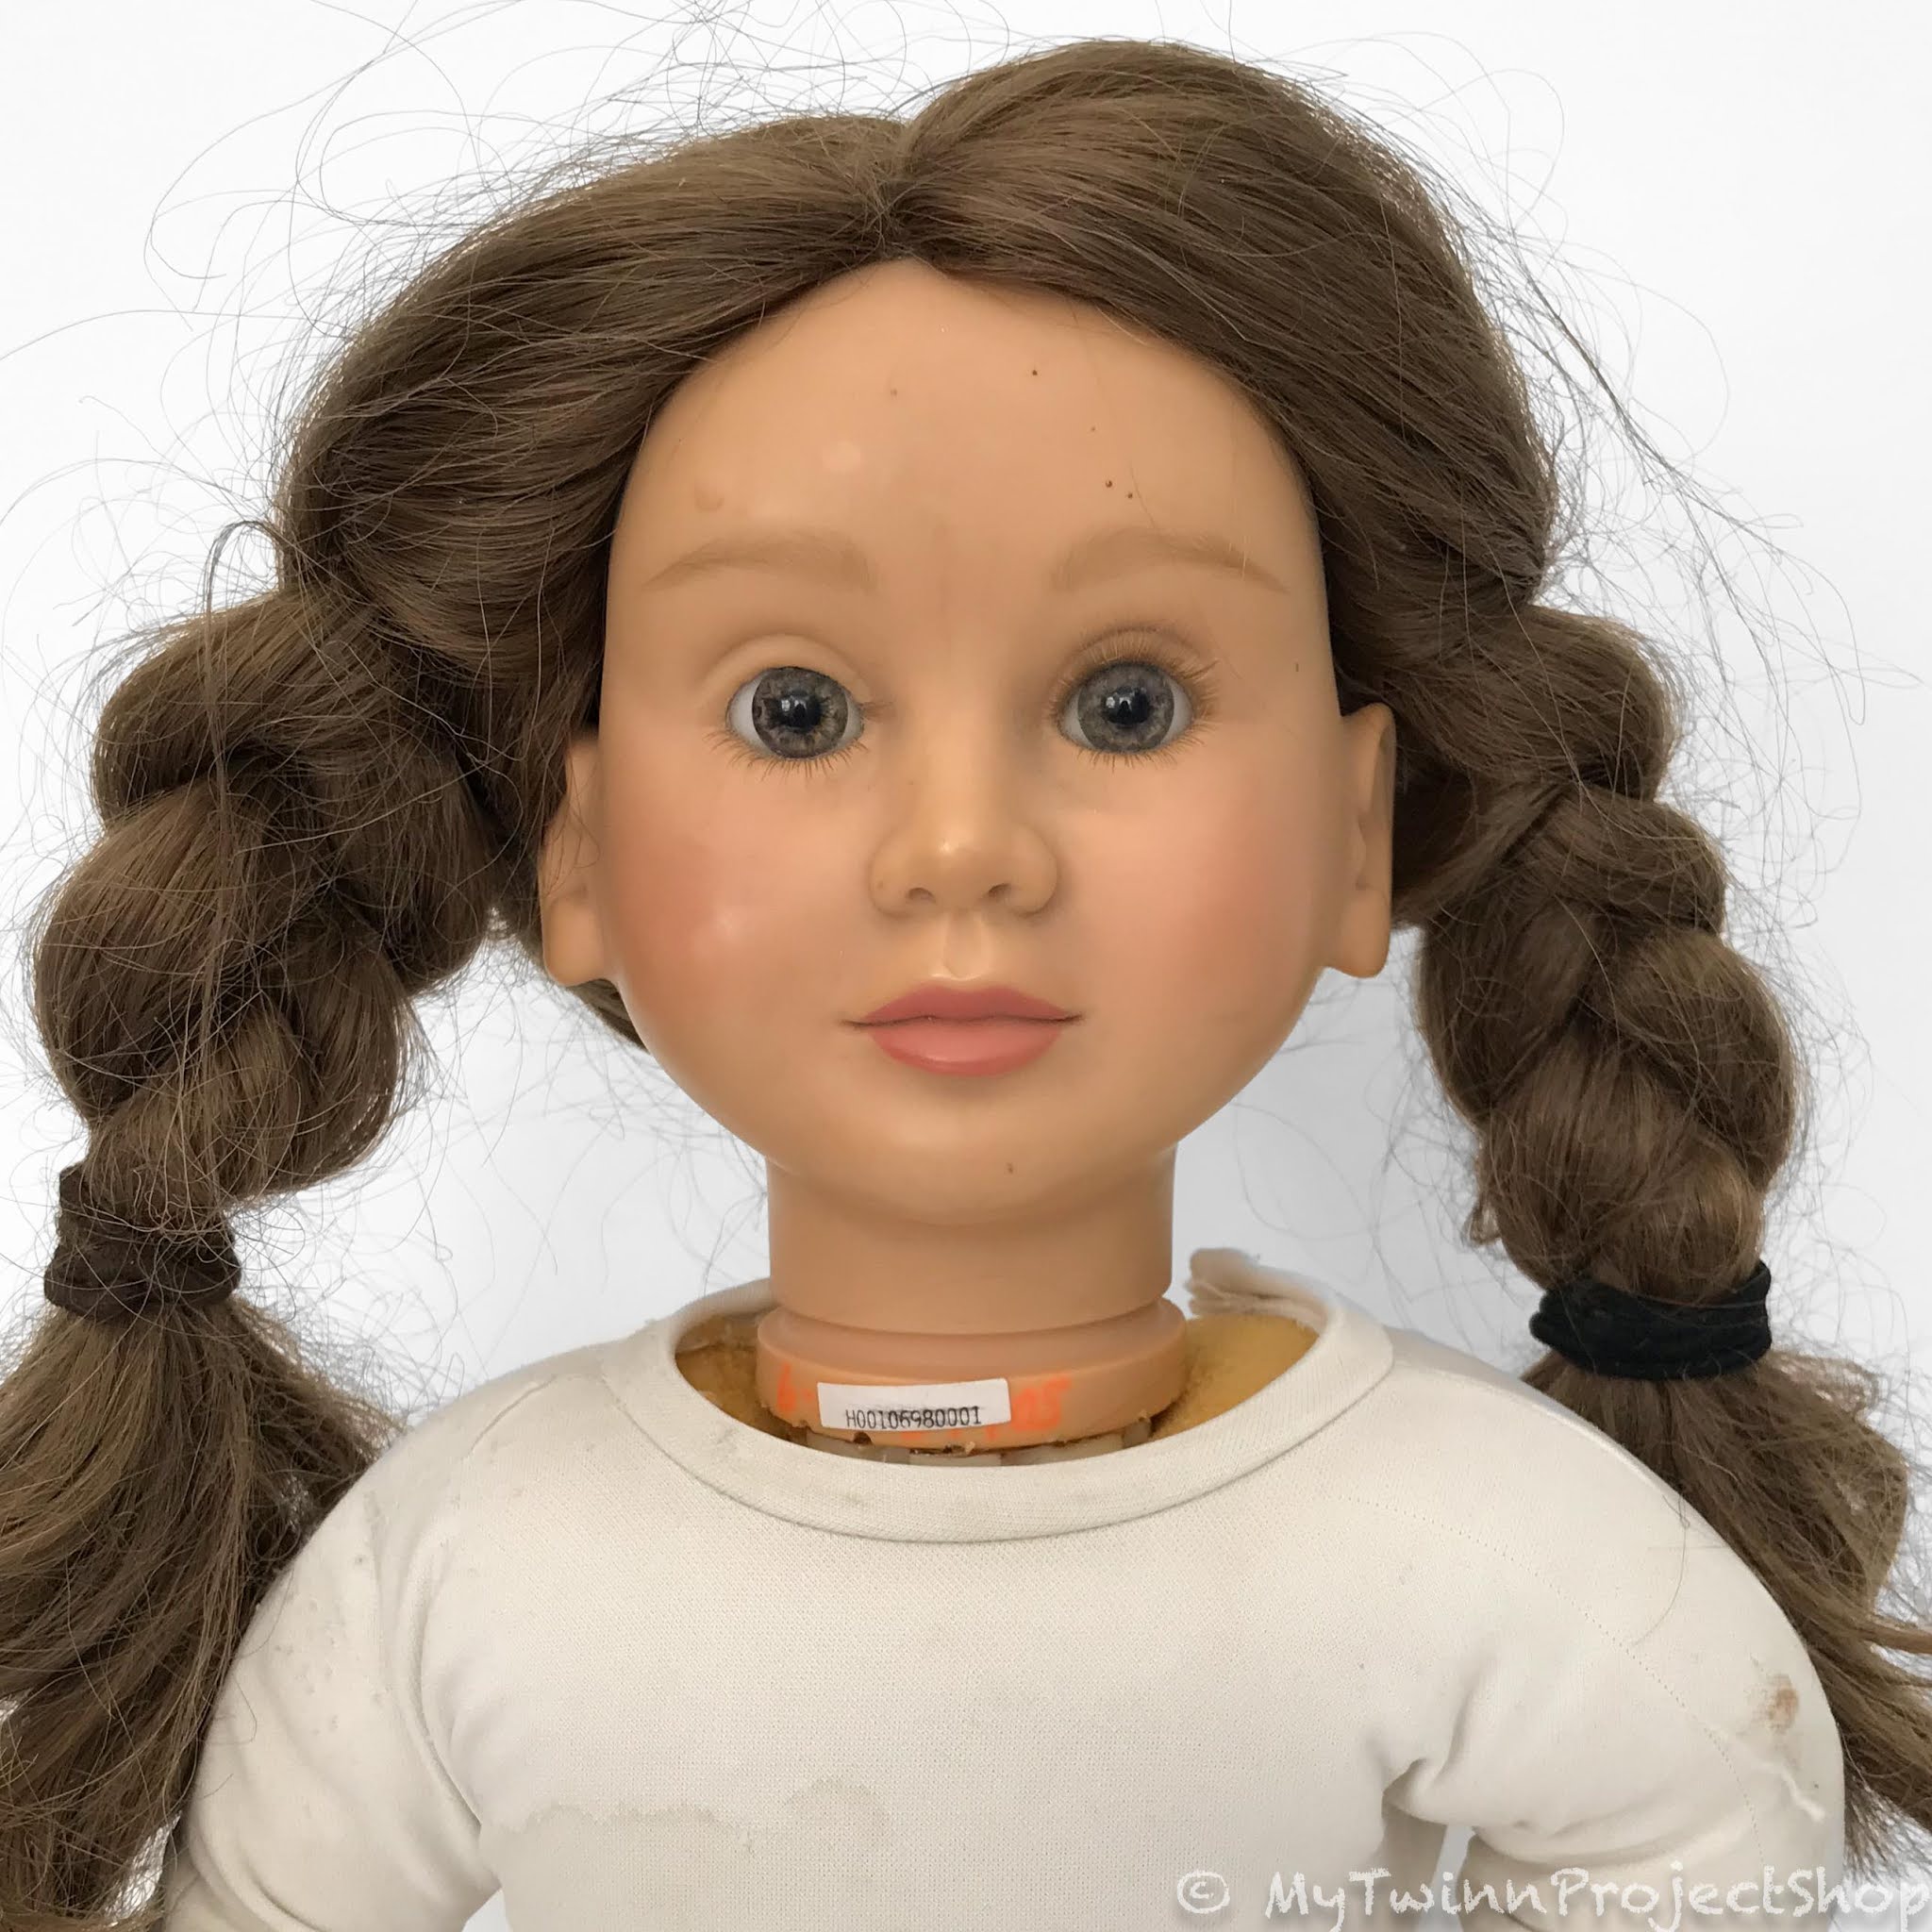 Children's Realistic Mannequins: Fleshtone Molded Hair 5 Year Old Girl -  Arms Behind Back